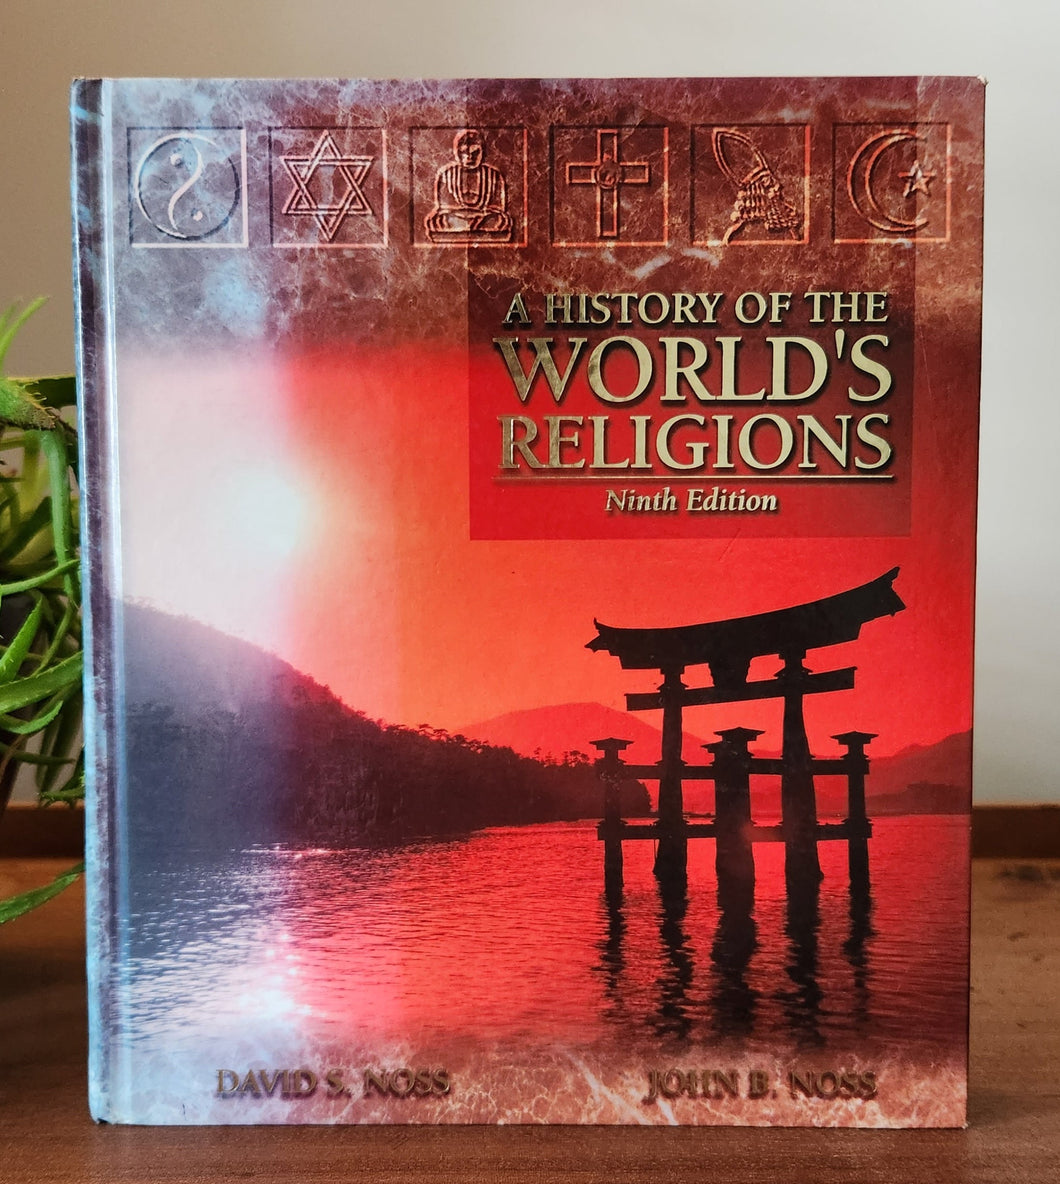 A History of the World's Religions by David S. Noss, John B. Noss (Ninth Edition)